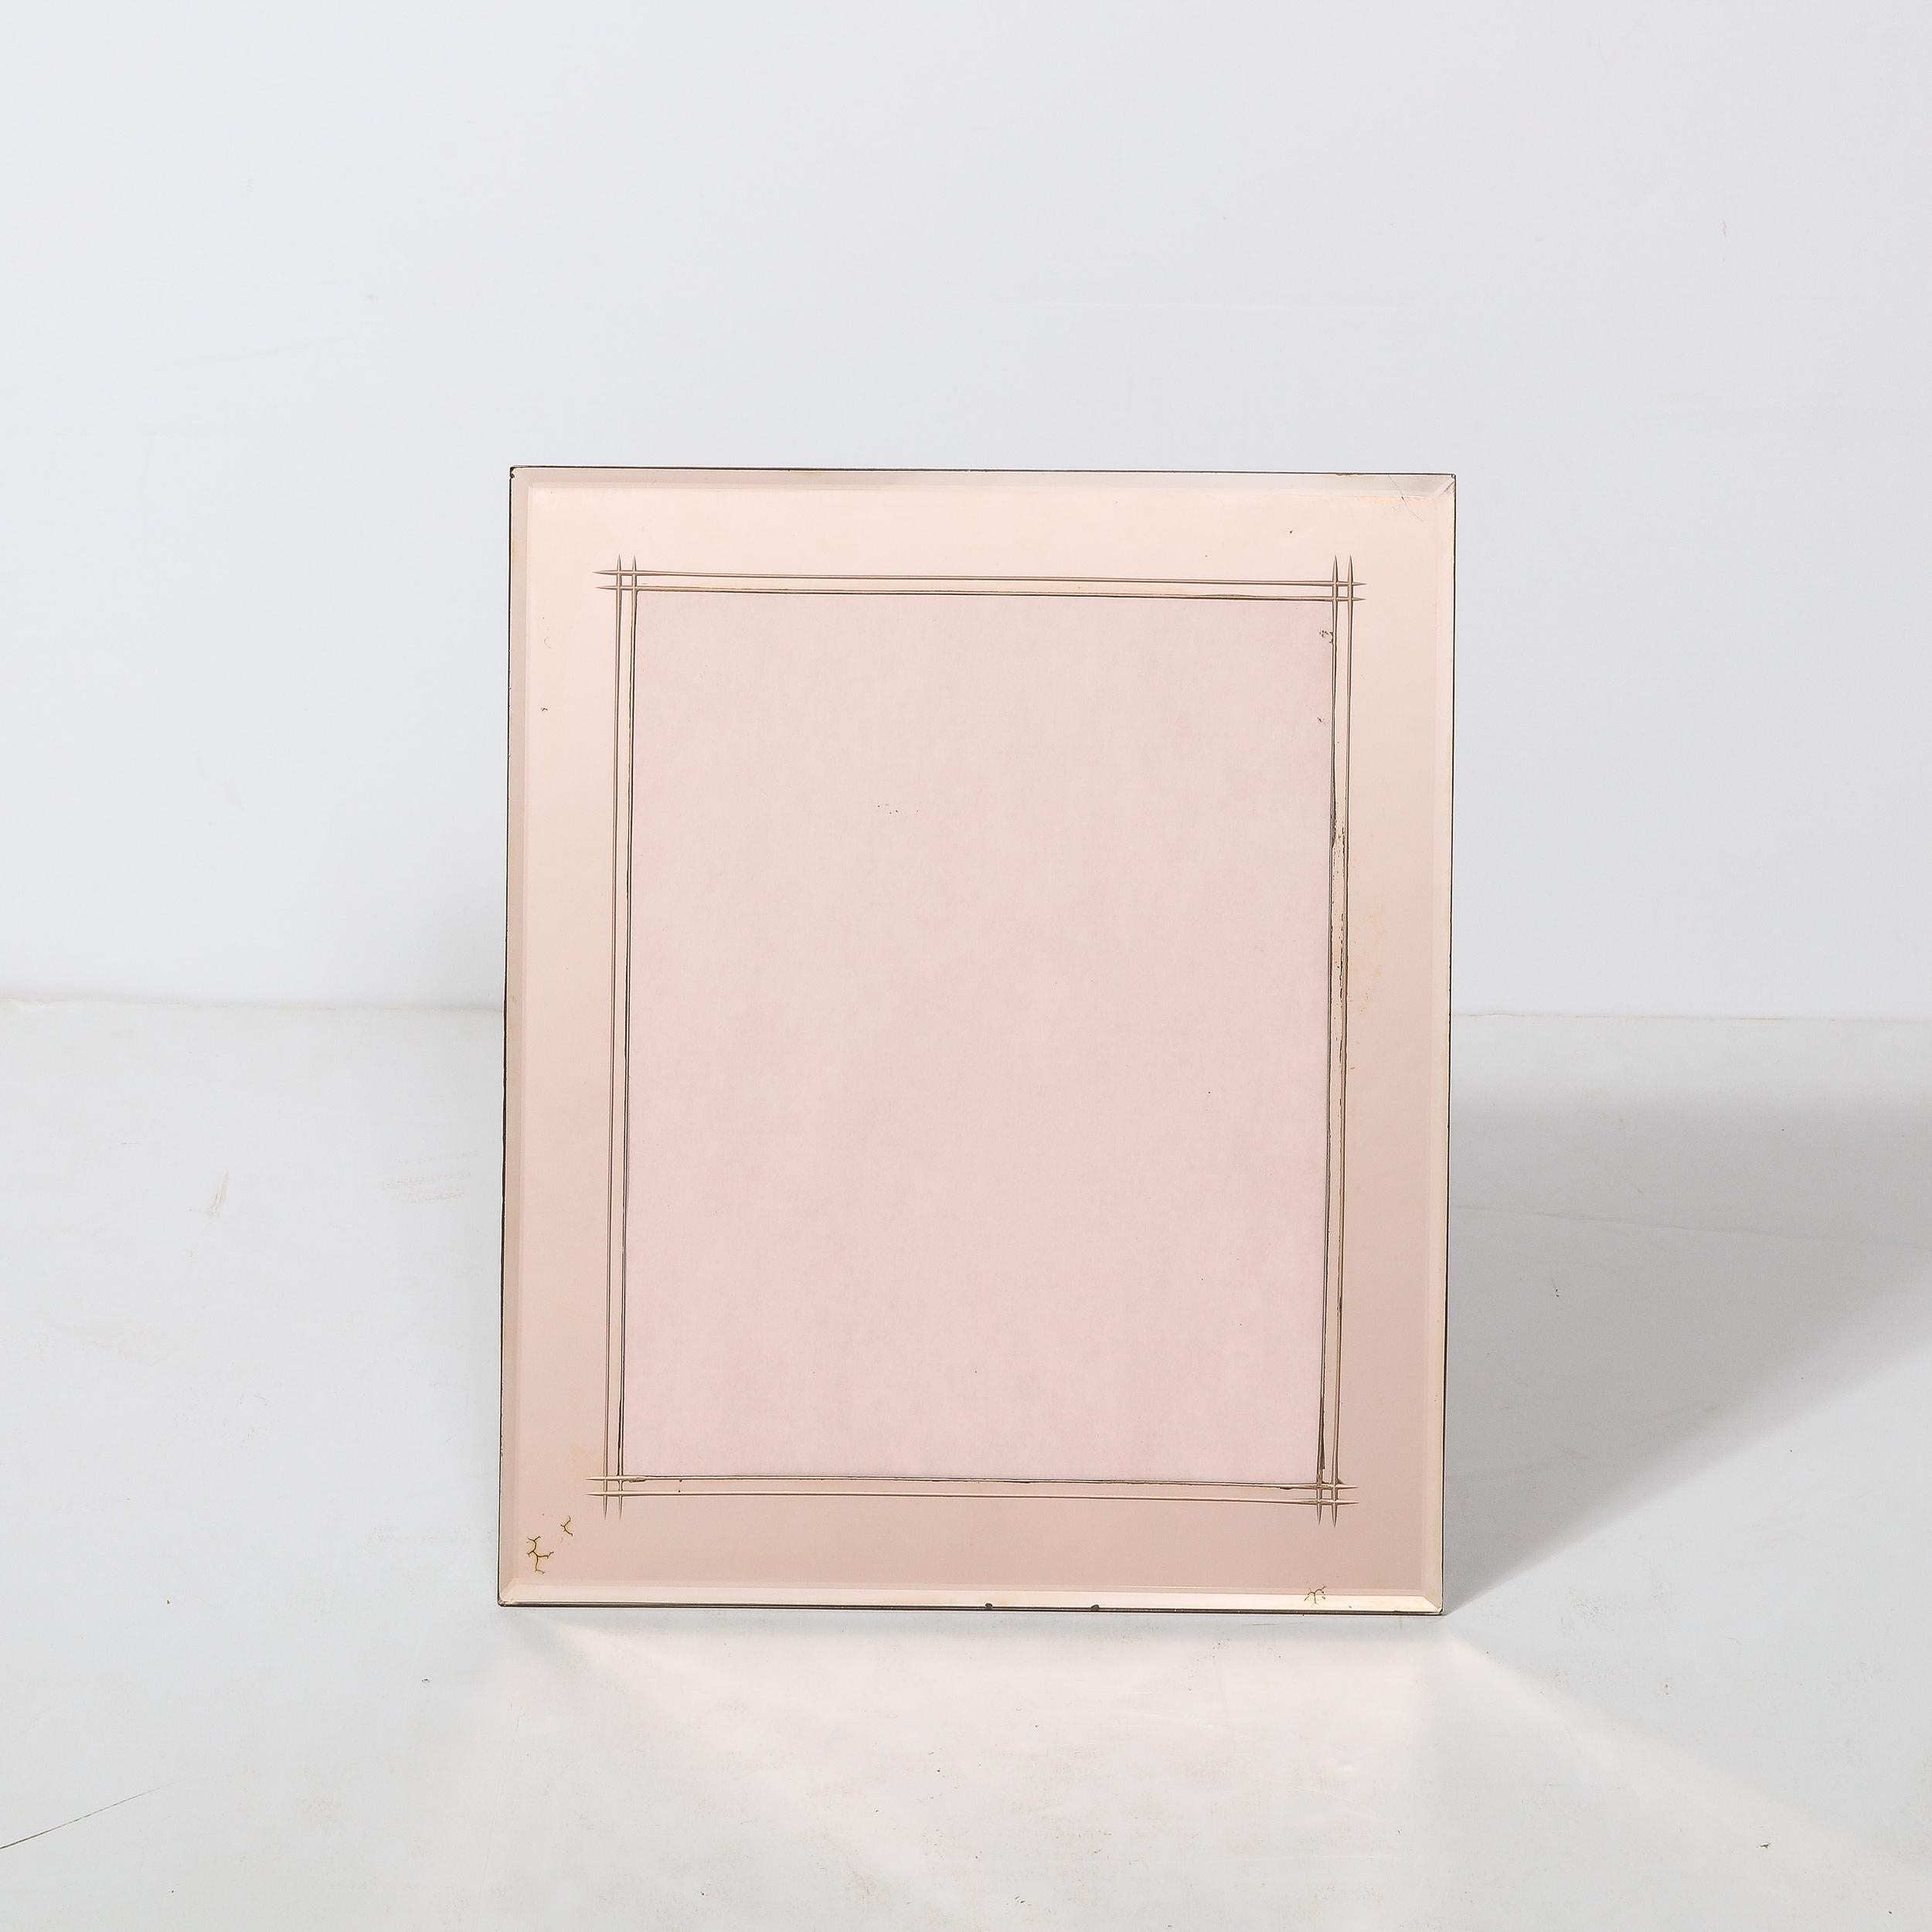 This picture frame is crafted in the United States, circa 1935, beautifully rendered Smoked Rose Glass. The frame is rectangular with Beveled Edge Detailing and utilizes reverse etching which draws the eyes towards the center of the piece and